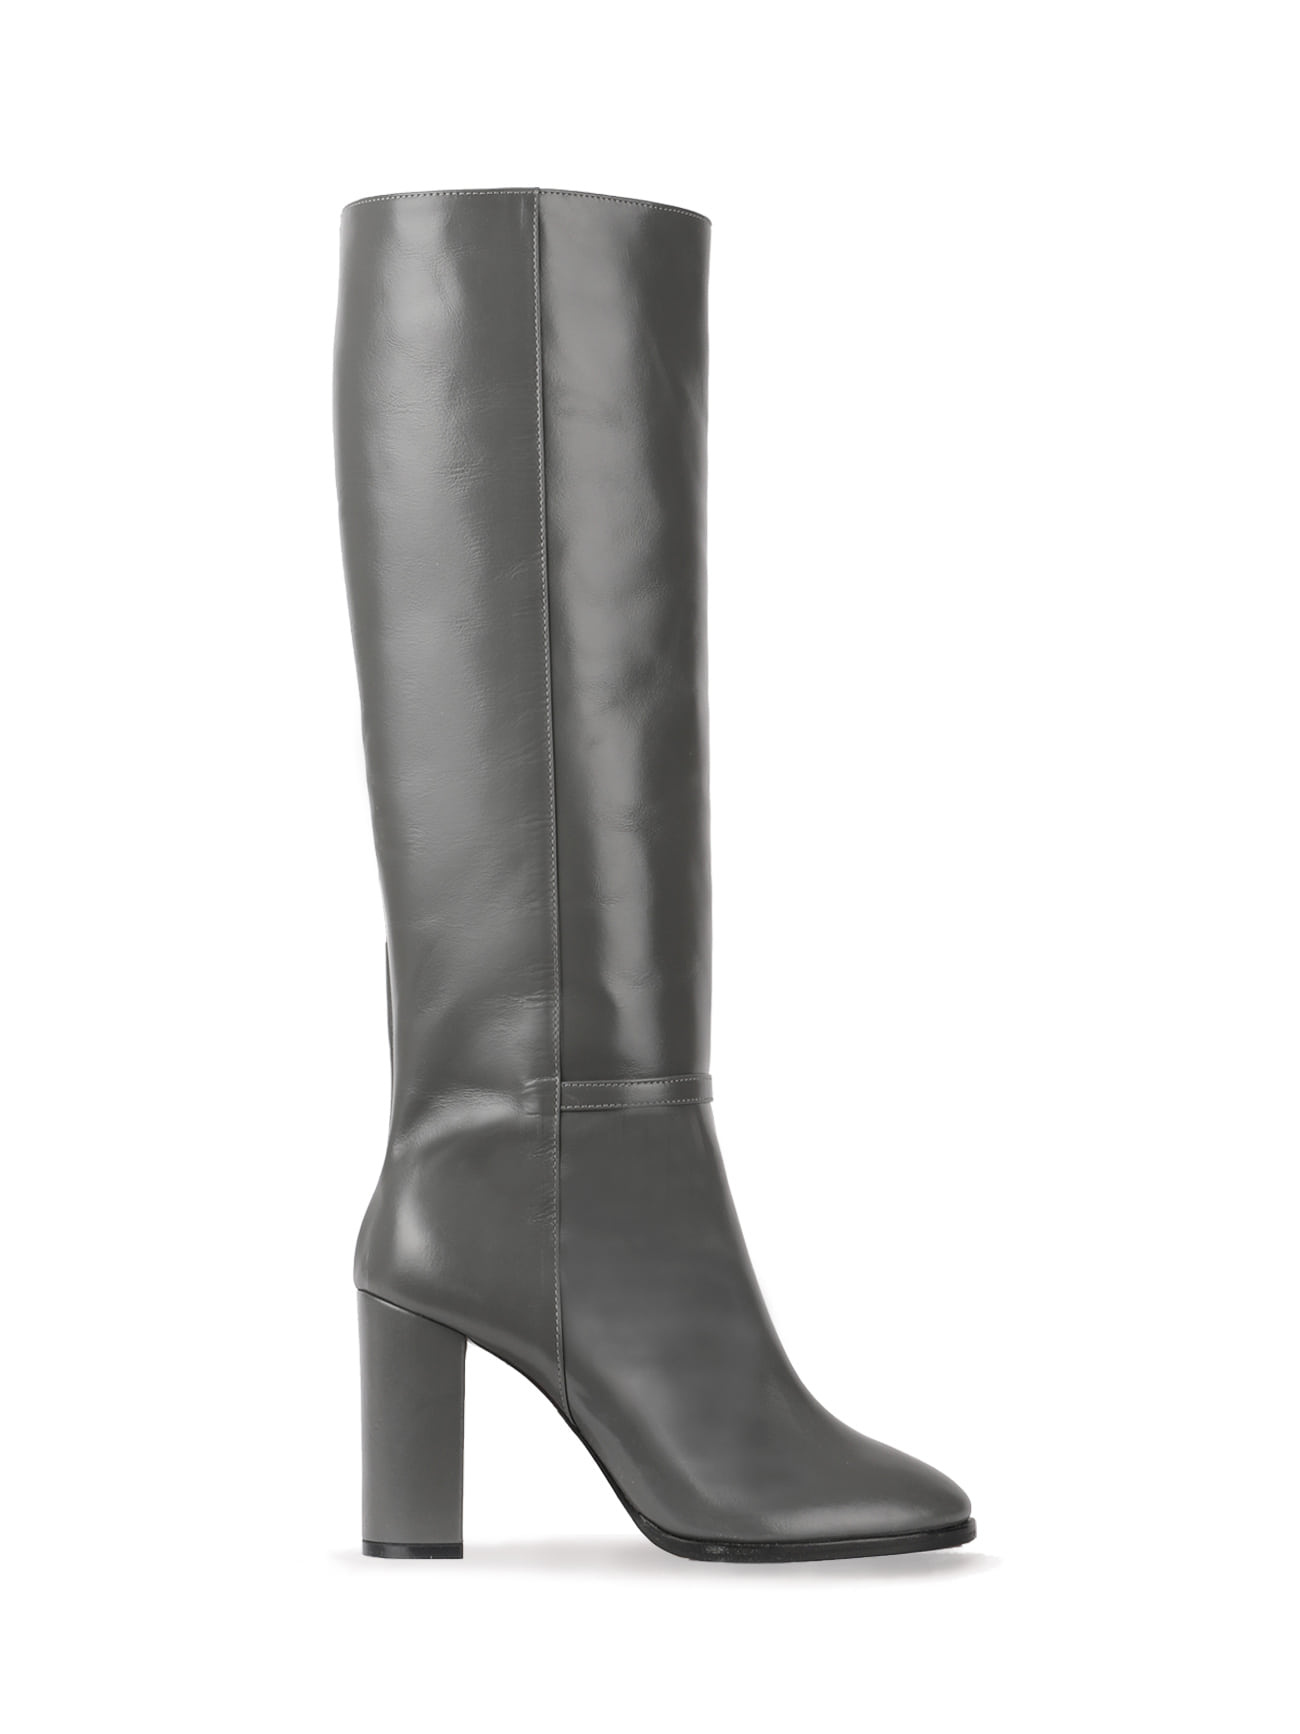 KATE LEATHER KNEE BOOTS - DARK GRAY